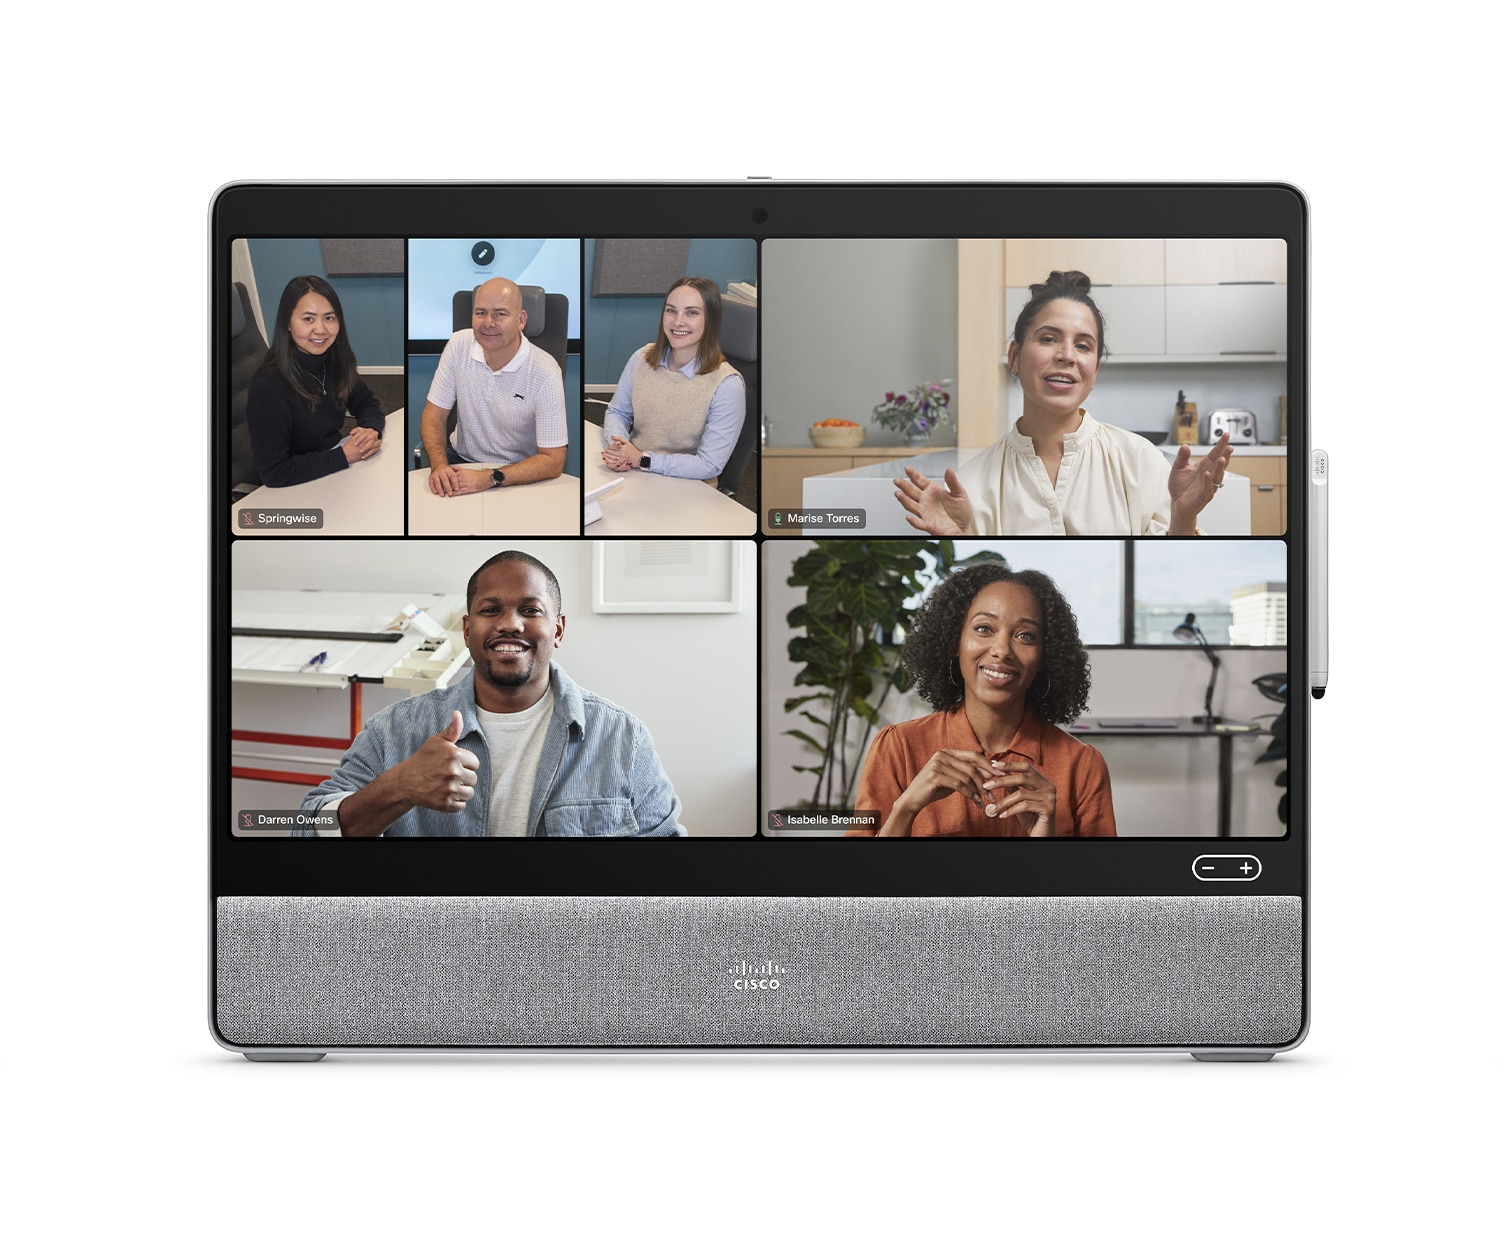 Frames view on Cisco Desk device with Webex meeting platform selected for video conference.